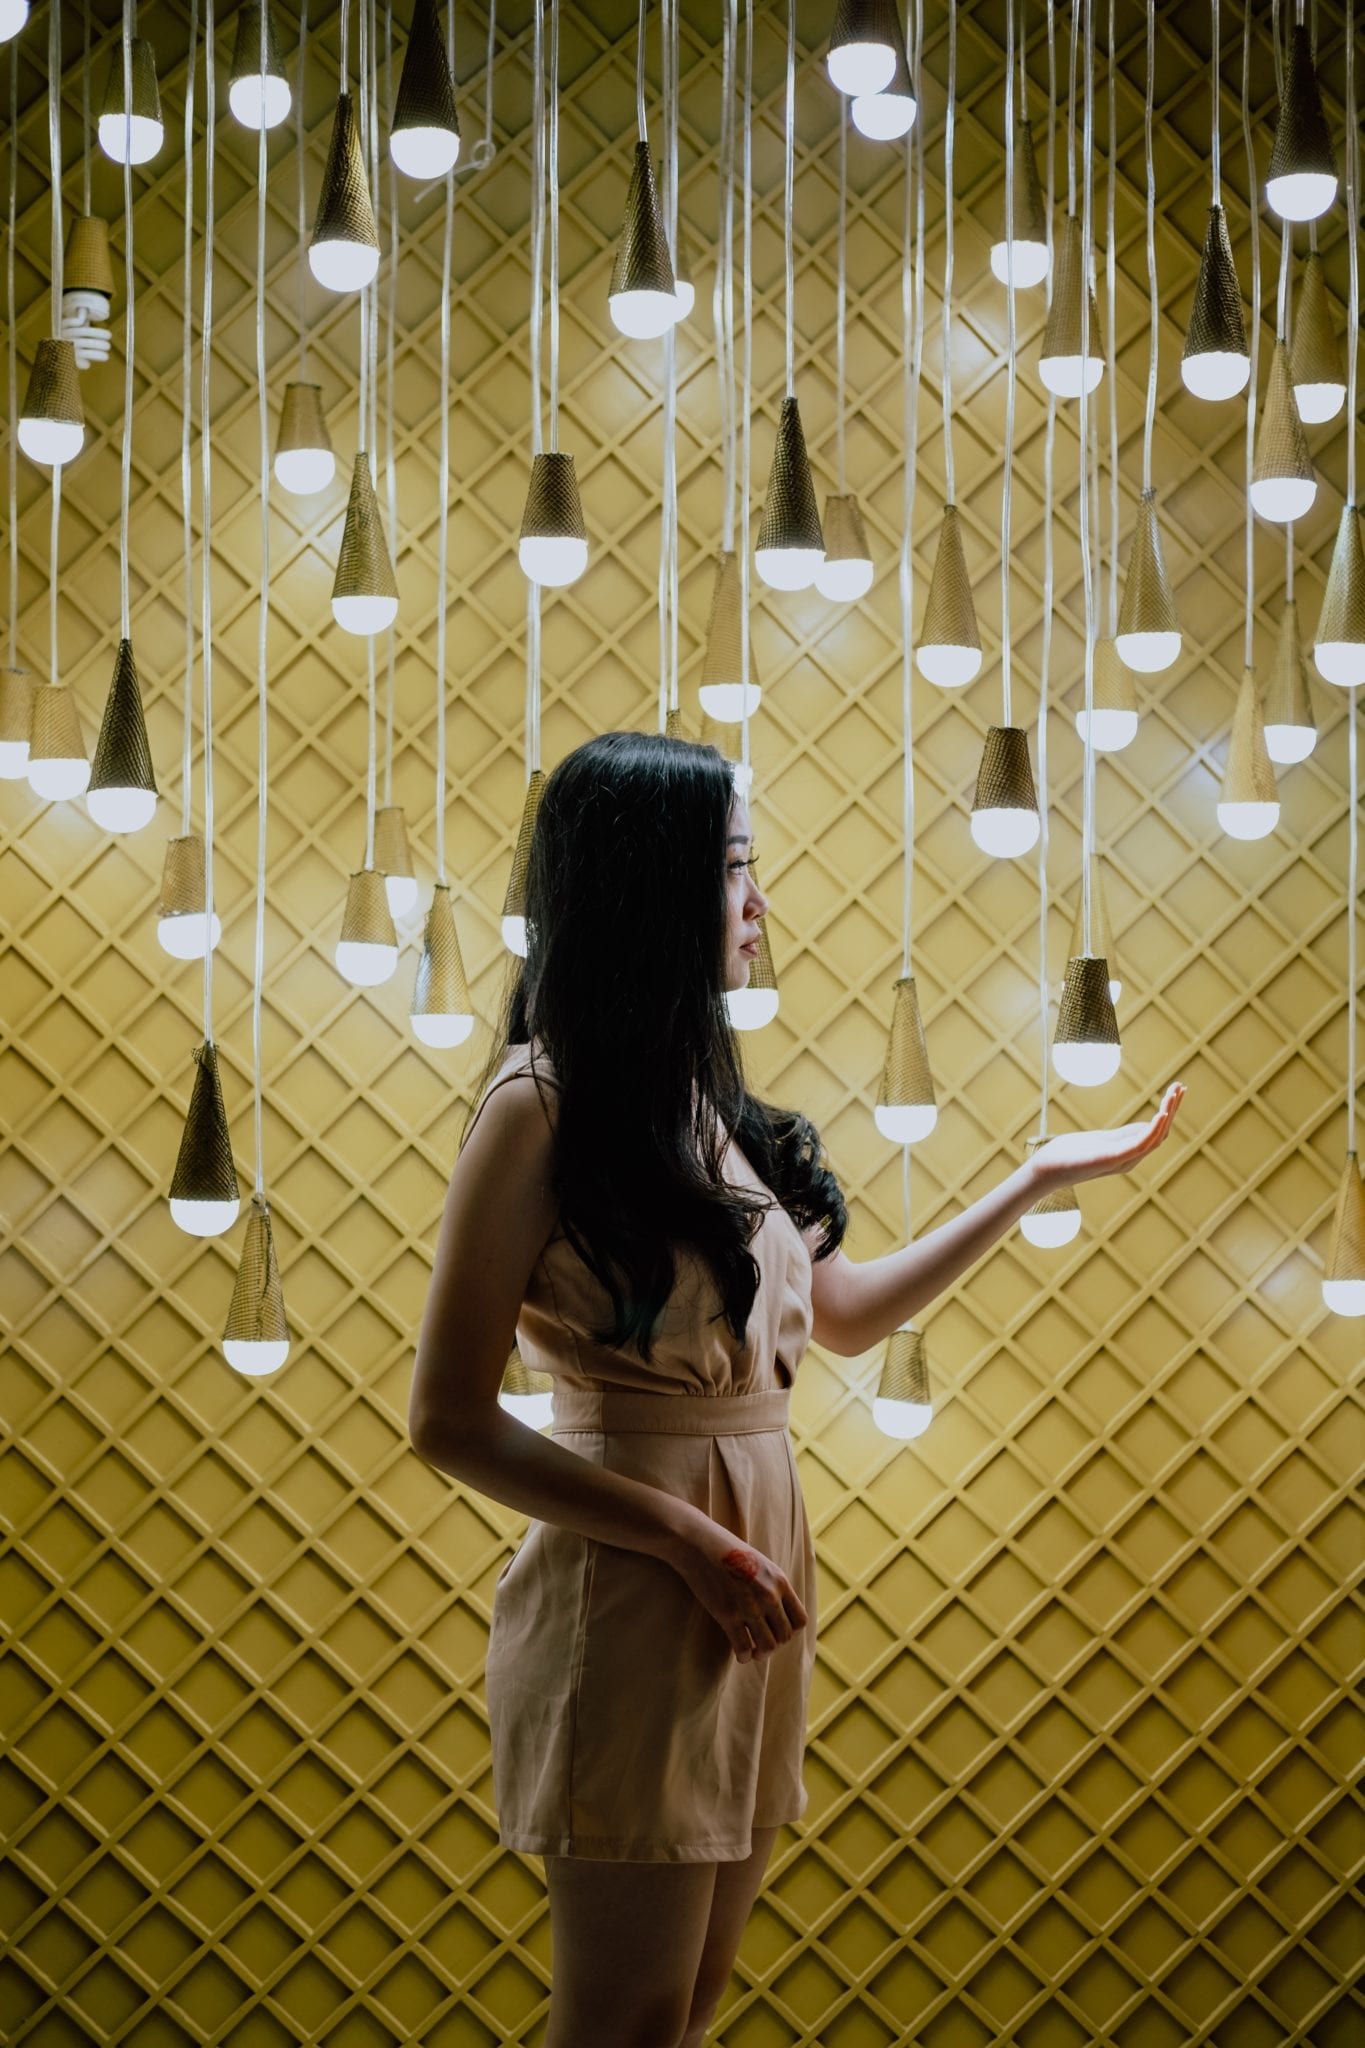 different software tests represented by woman surrounded by hanging light bulbs